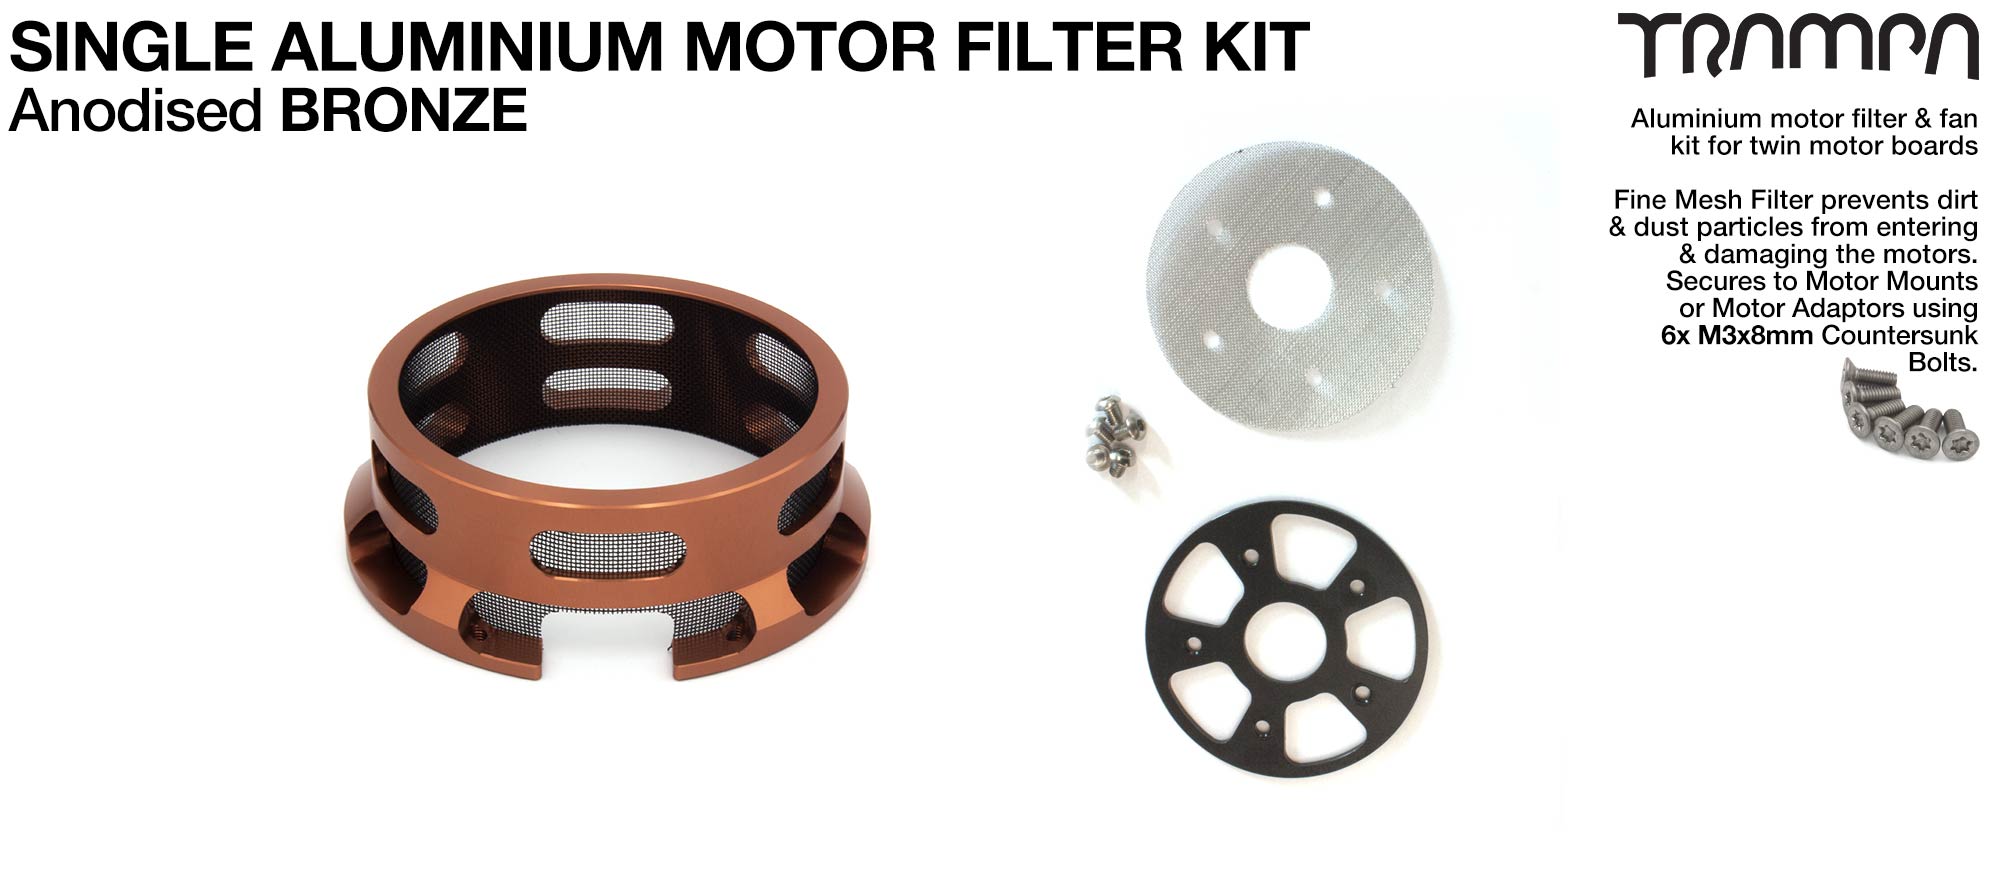 HALF CAGE Motor protection  - BRONZE anodised with Filters - SINGLE